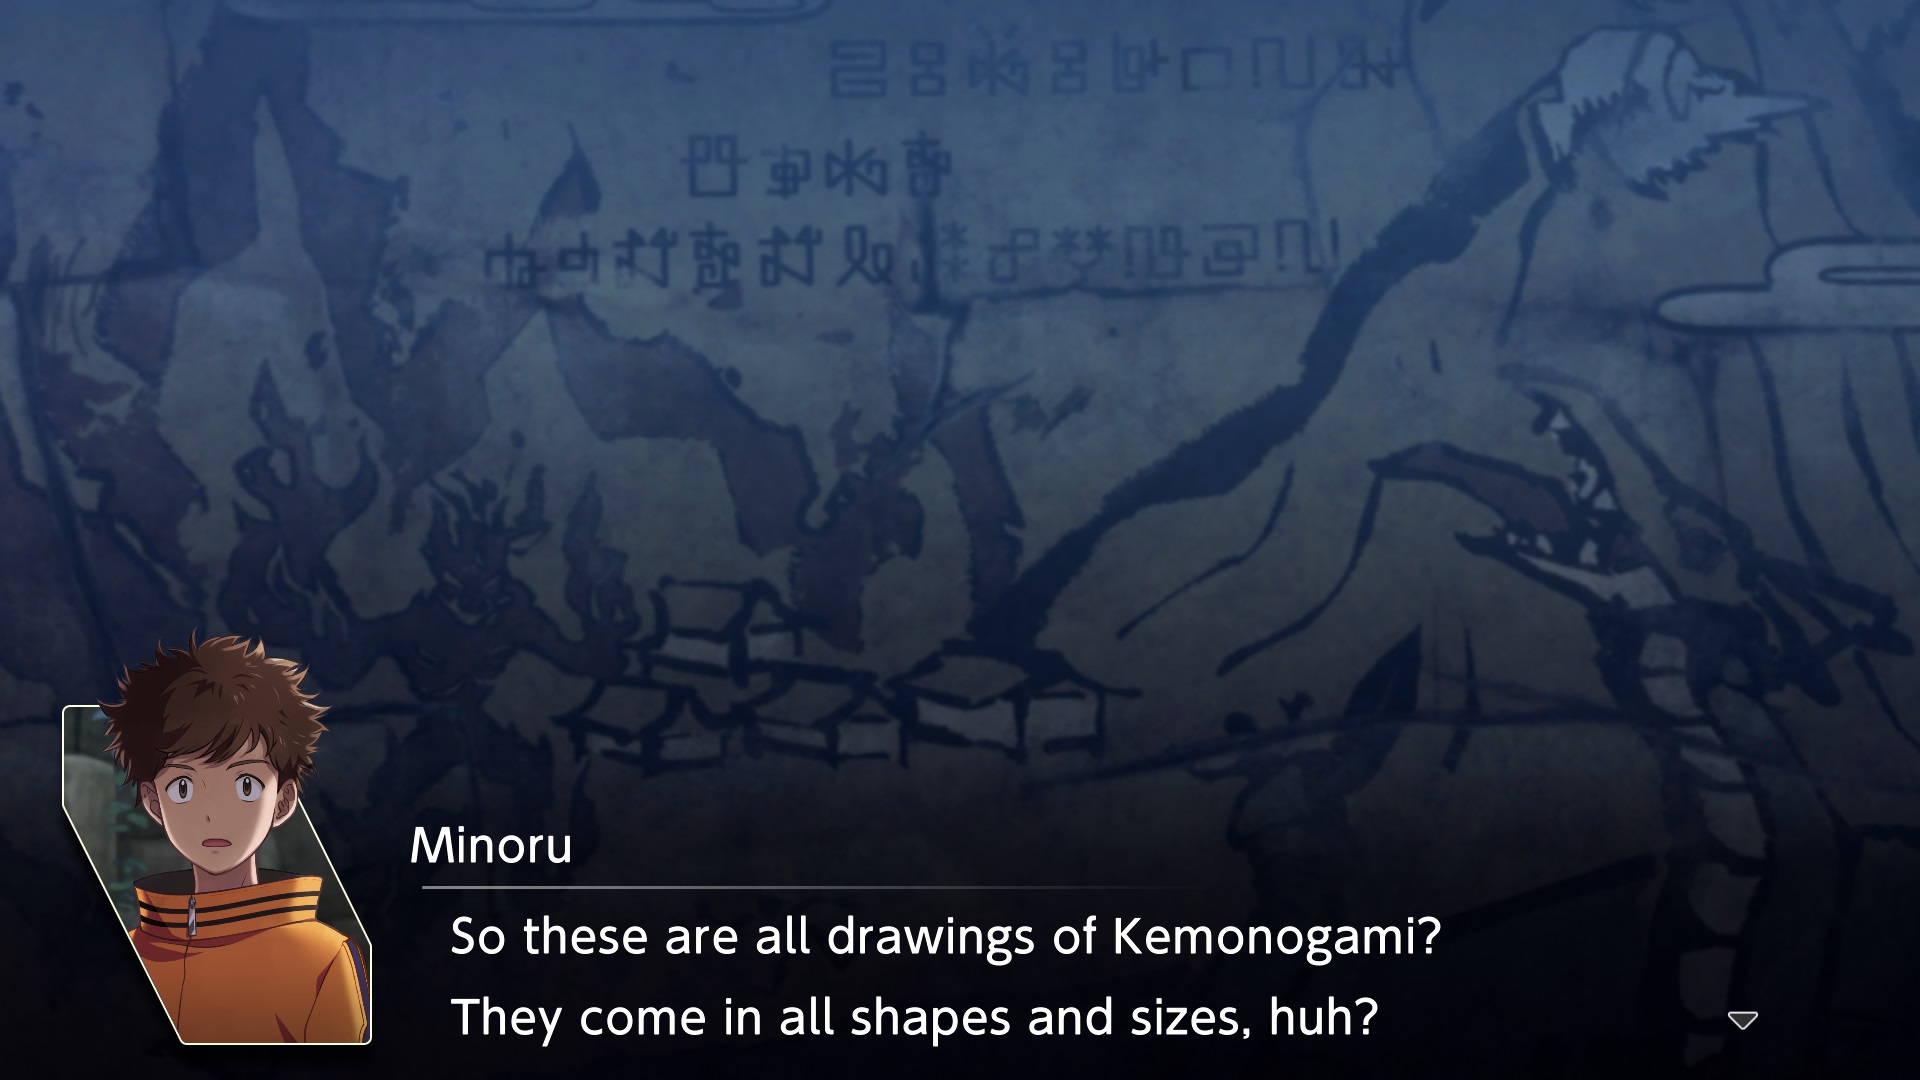 I guess they are “Kemonogami” now